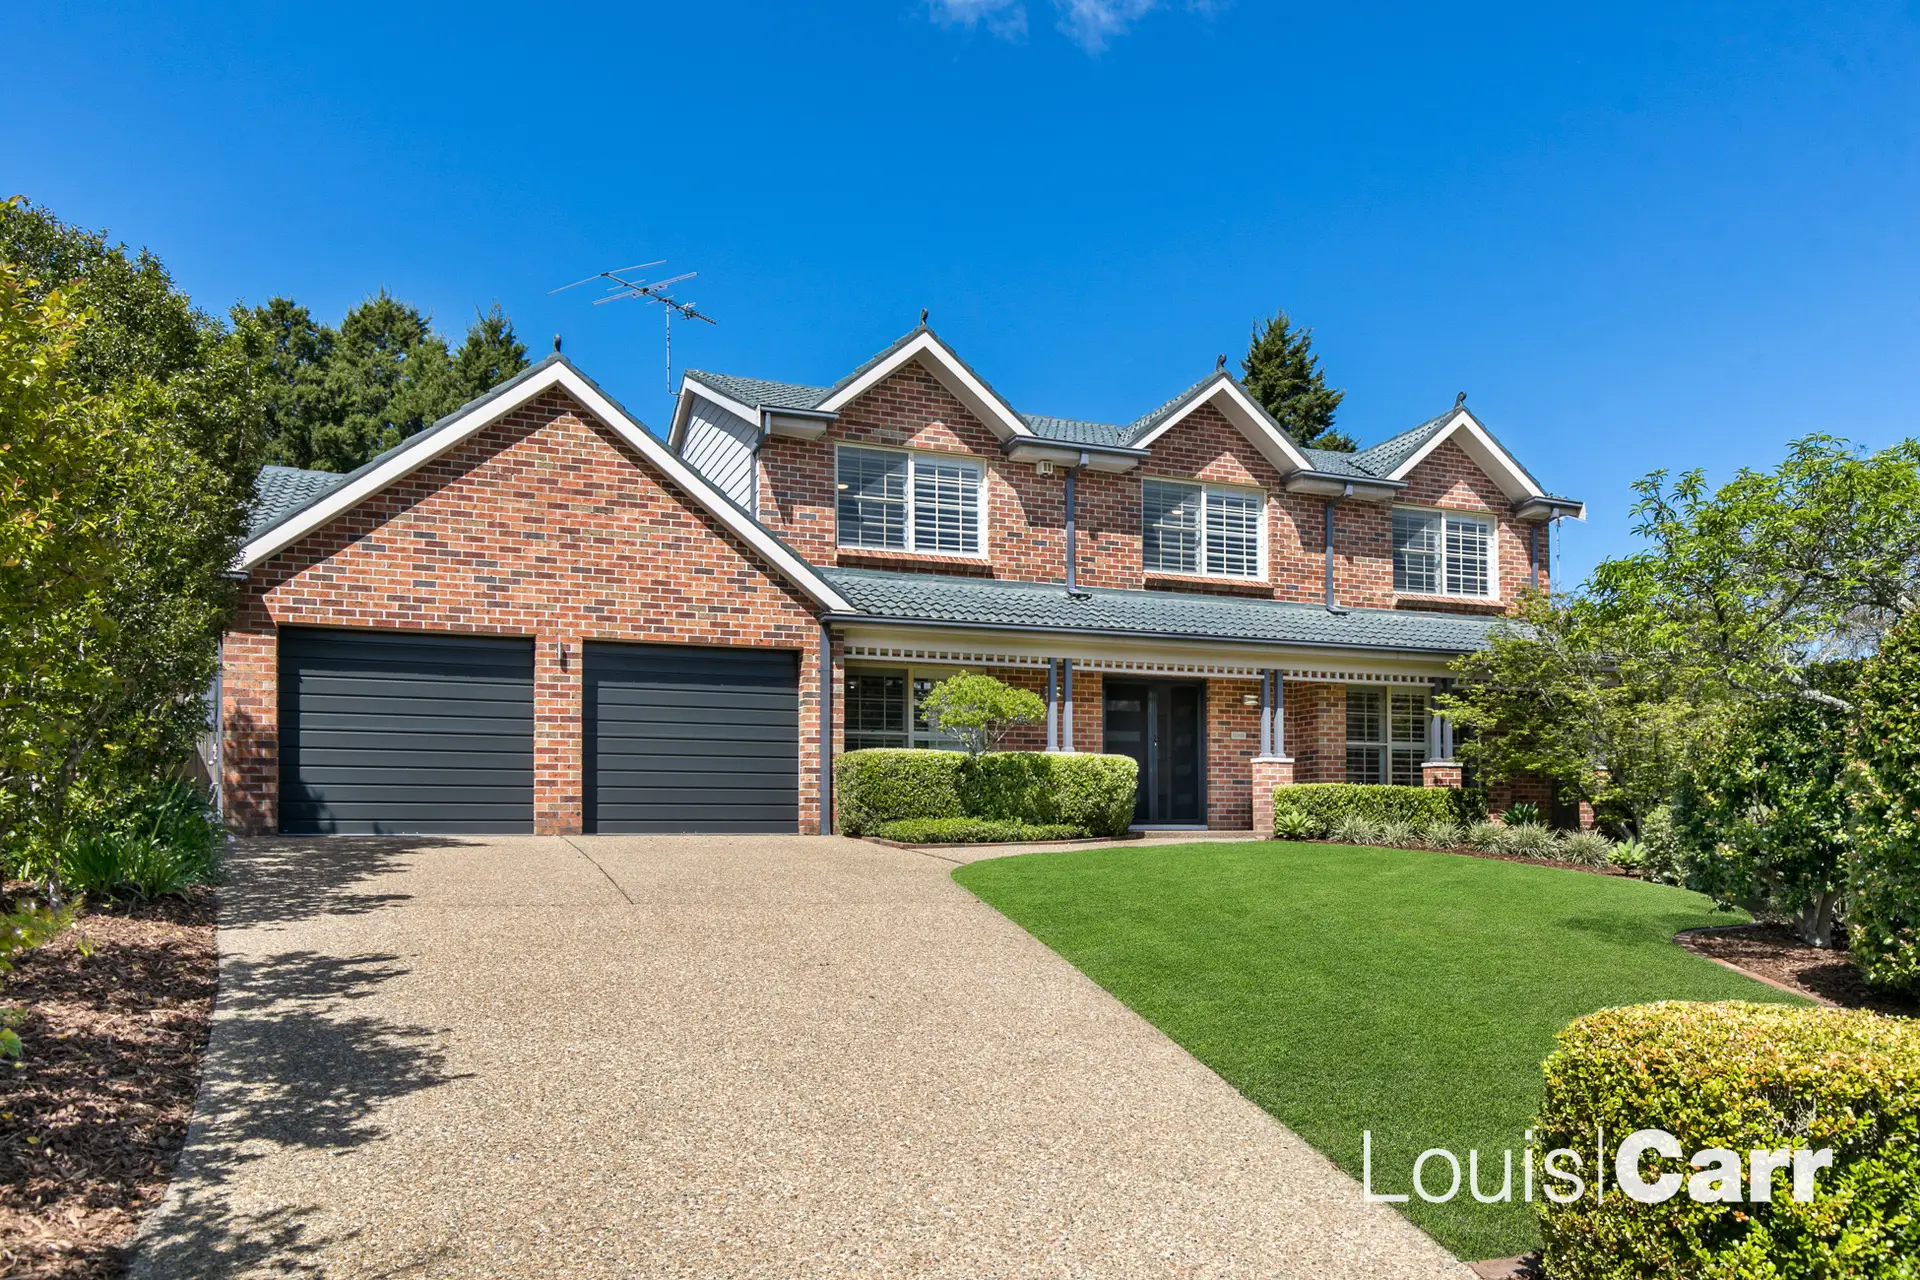 Photo #1: 12 Chiswick Place, Cherrybrook - Sold by Louis Carr Real Estate